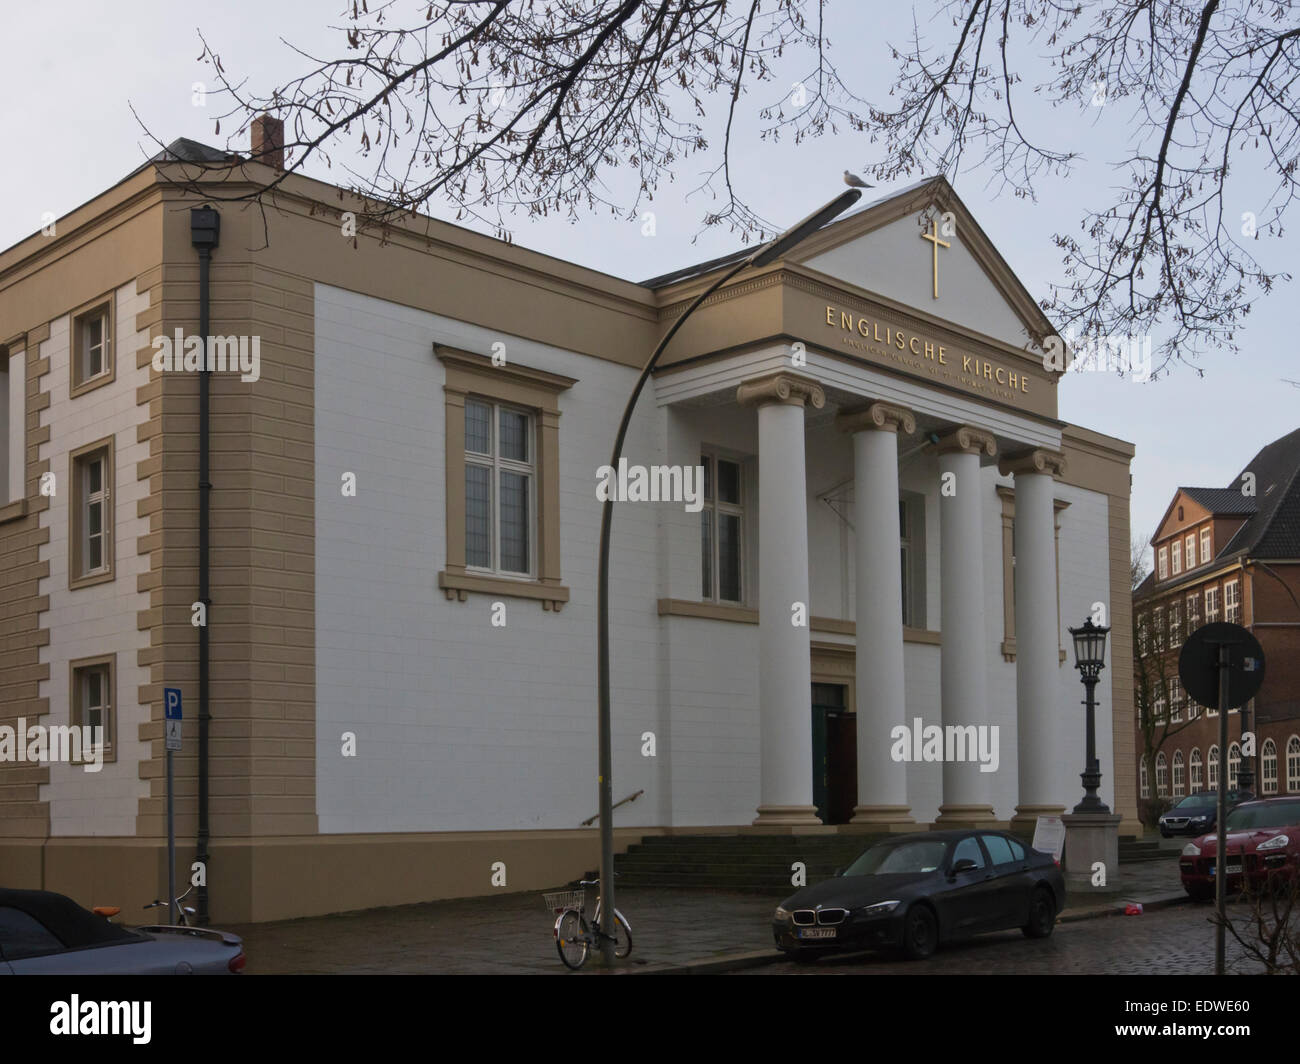 Englische Kirche , Anglican Church of St Thomas Becket in Hamburg Germany Stock Photo